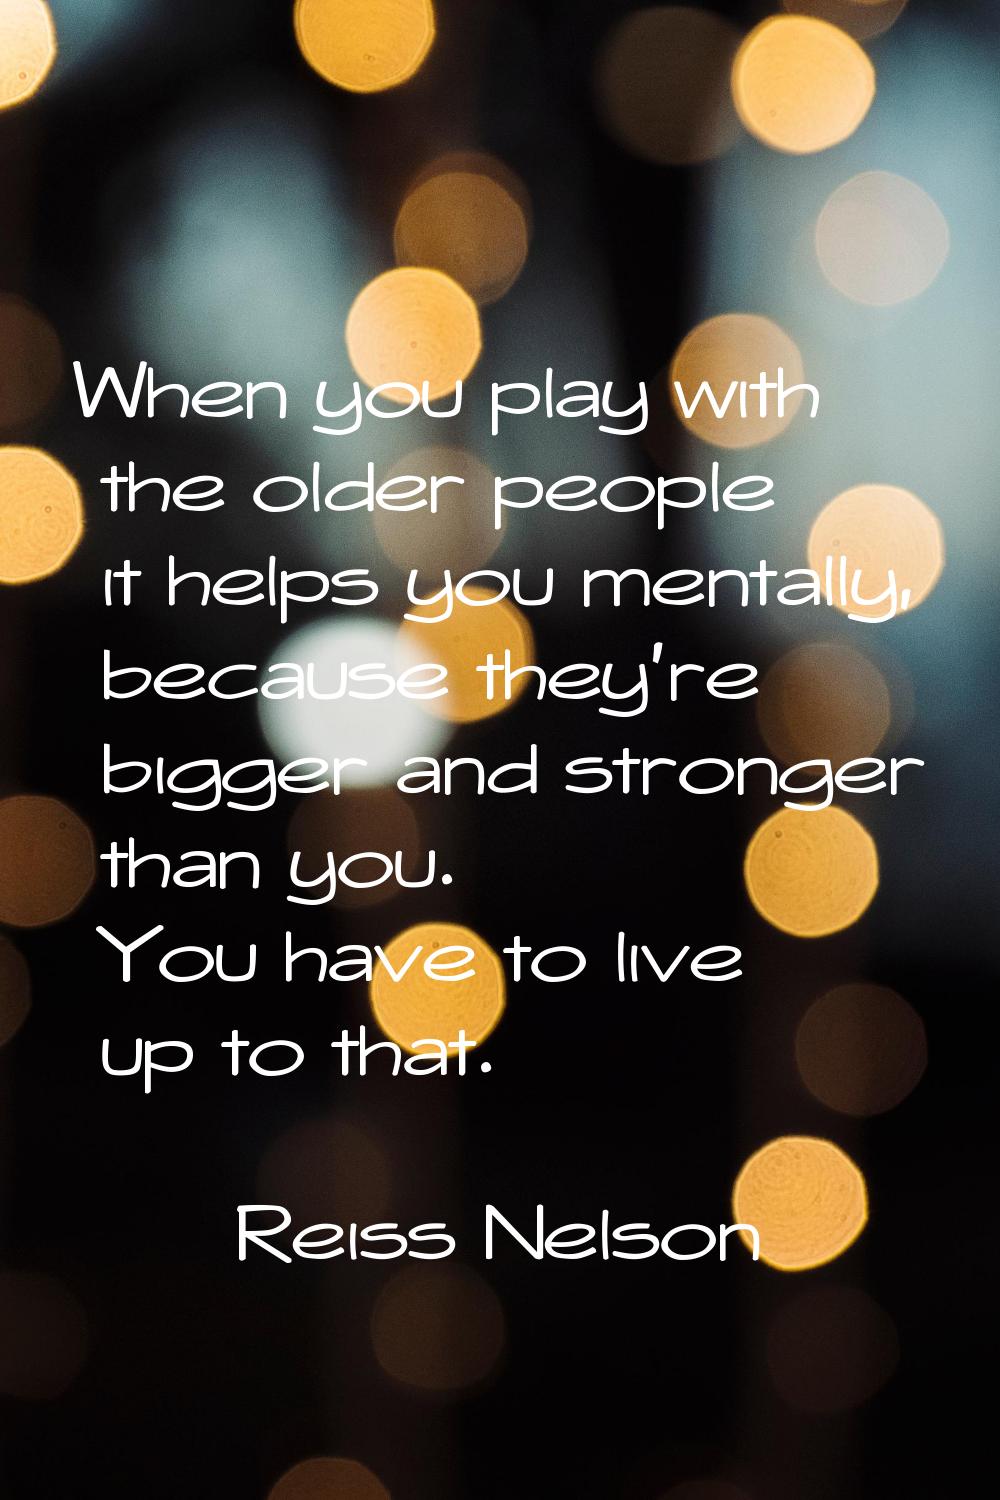 When you play with the older people it helps you mentally, because they're bigger and stronger than